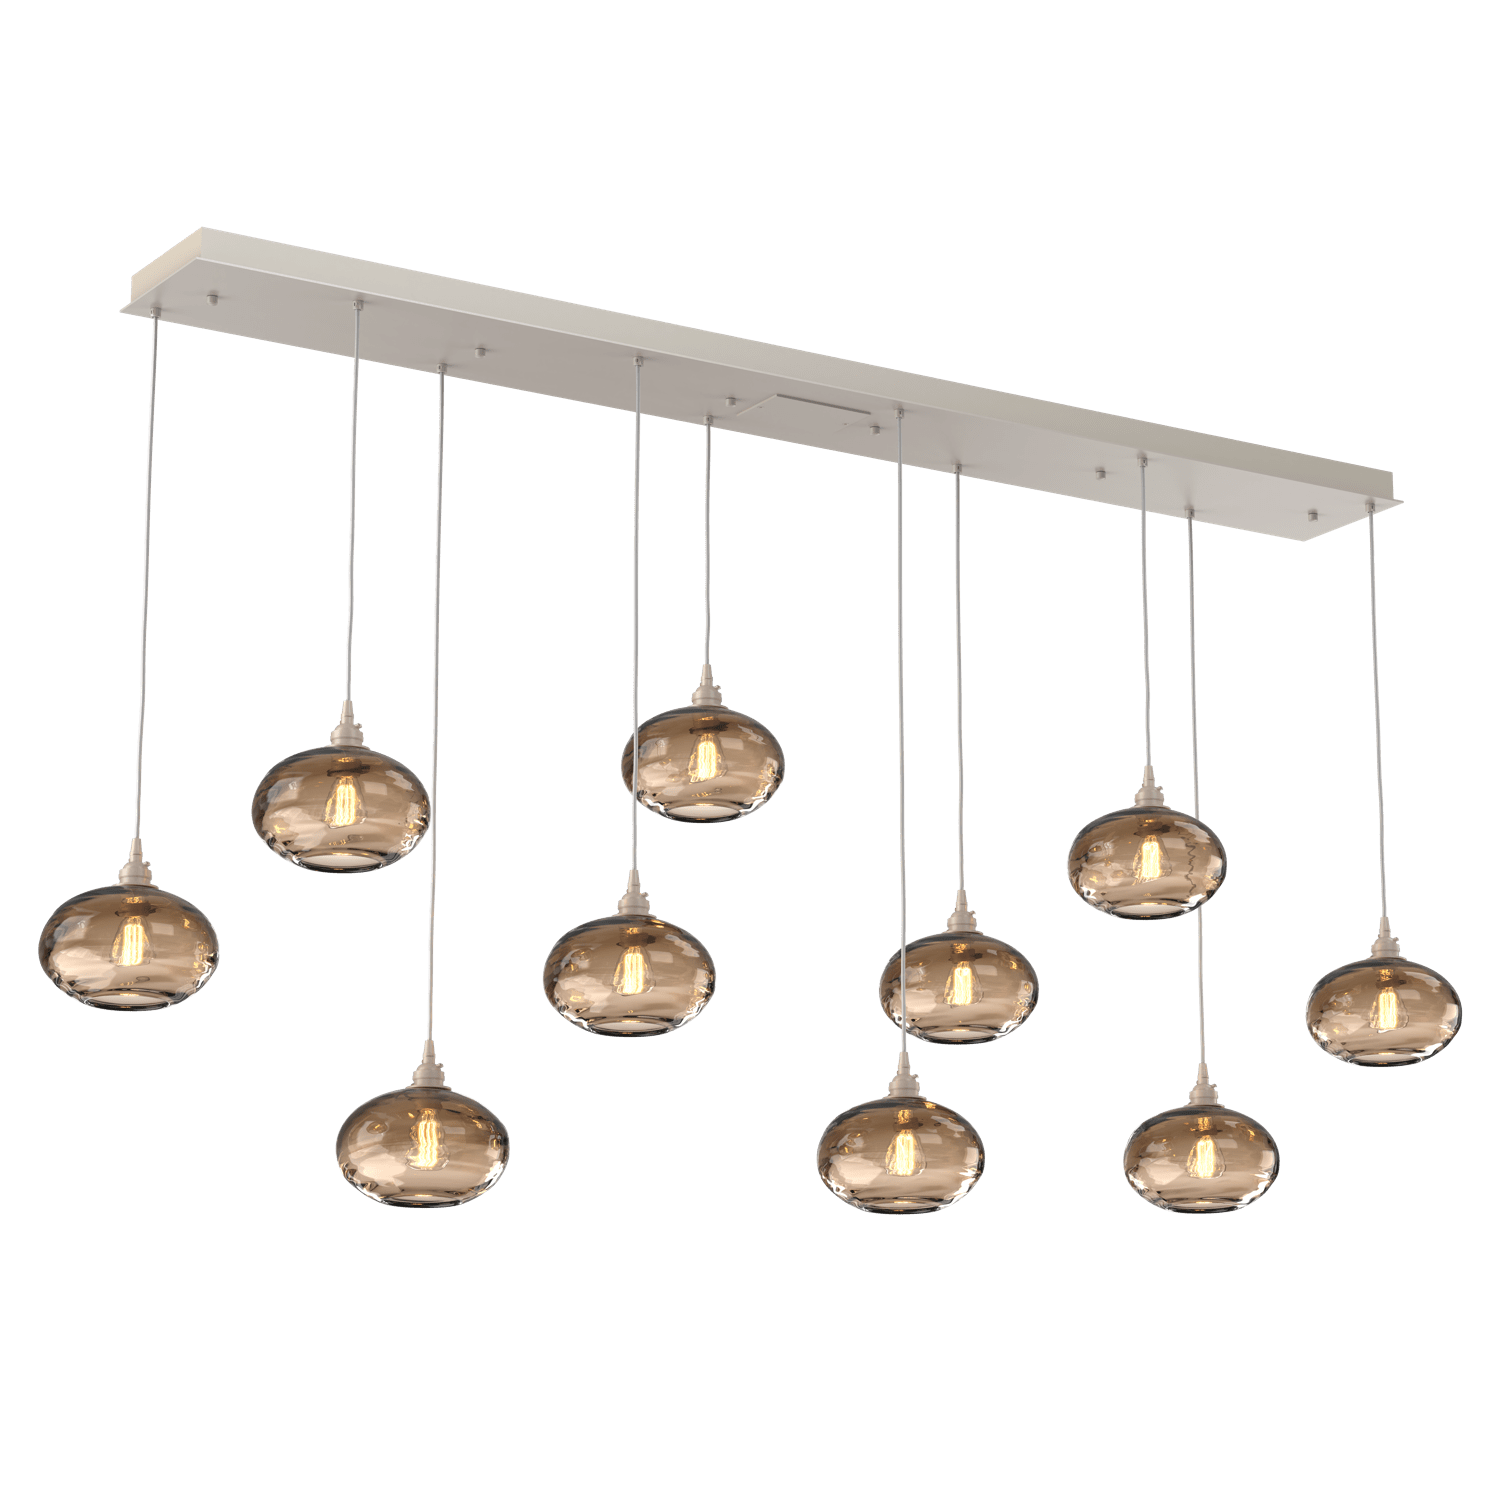 PLB0036-10-BS-OB-Hammerton-Studio-Optic-Blown-Glass-Coppa-10-light-linear-pendant-chandelier-with-metallic-beige-silver-finish-and-optic-bronze-blown-glass-shades-and-incandescent-lamping